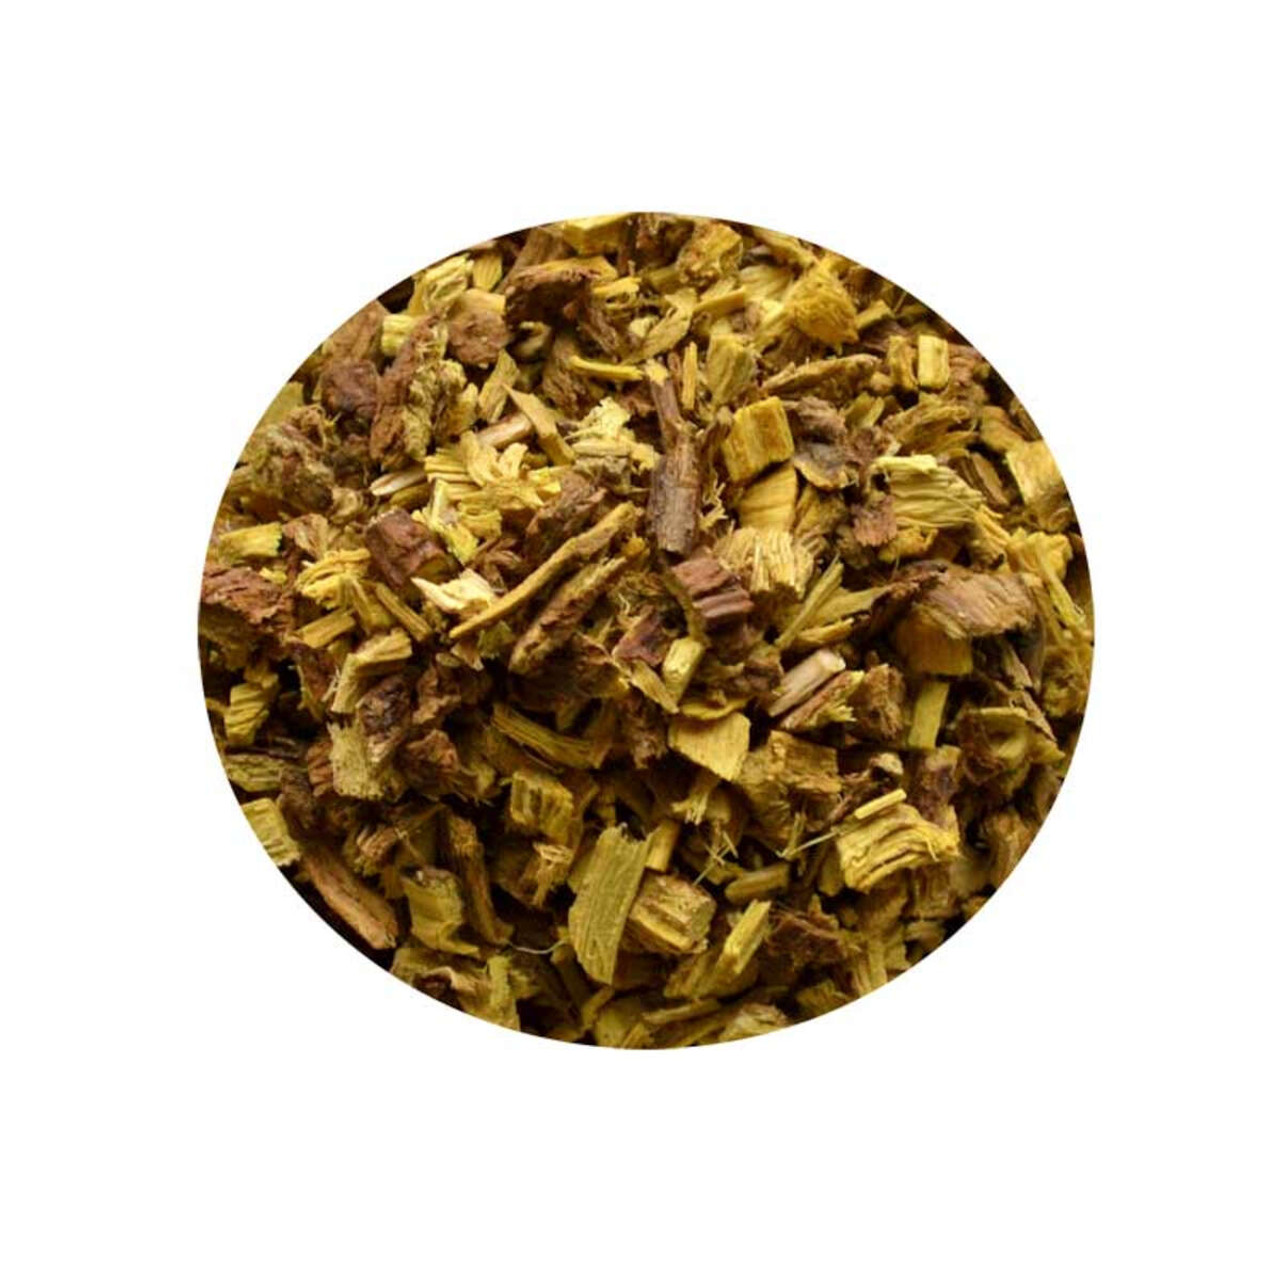 Licorice Root 2 oz. cut/sifted